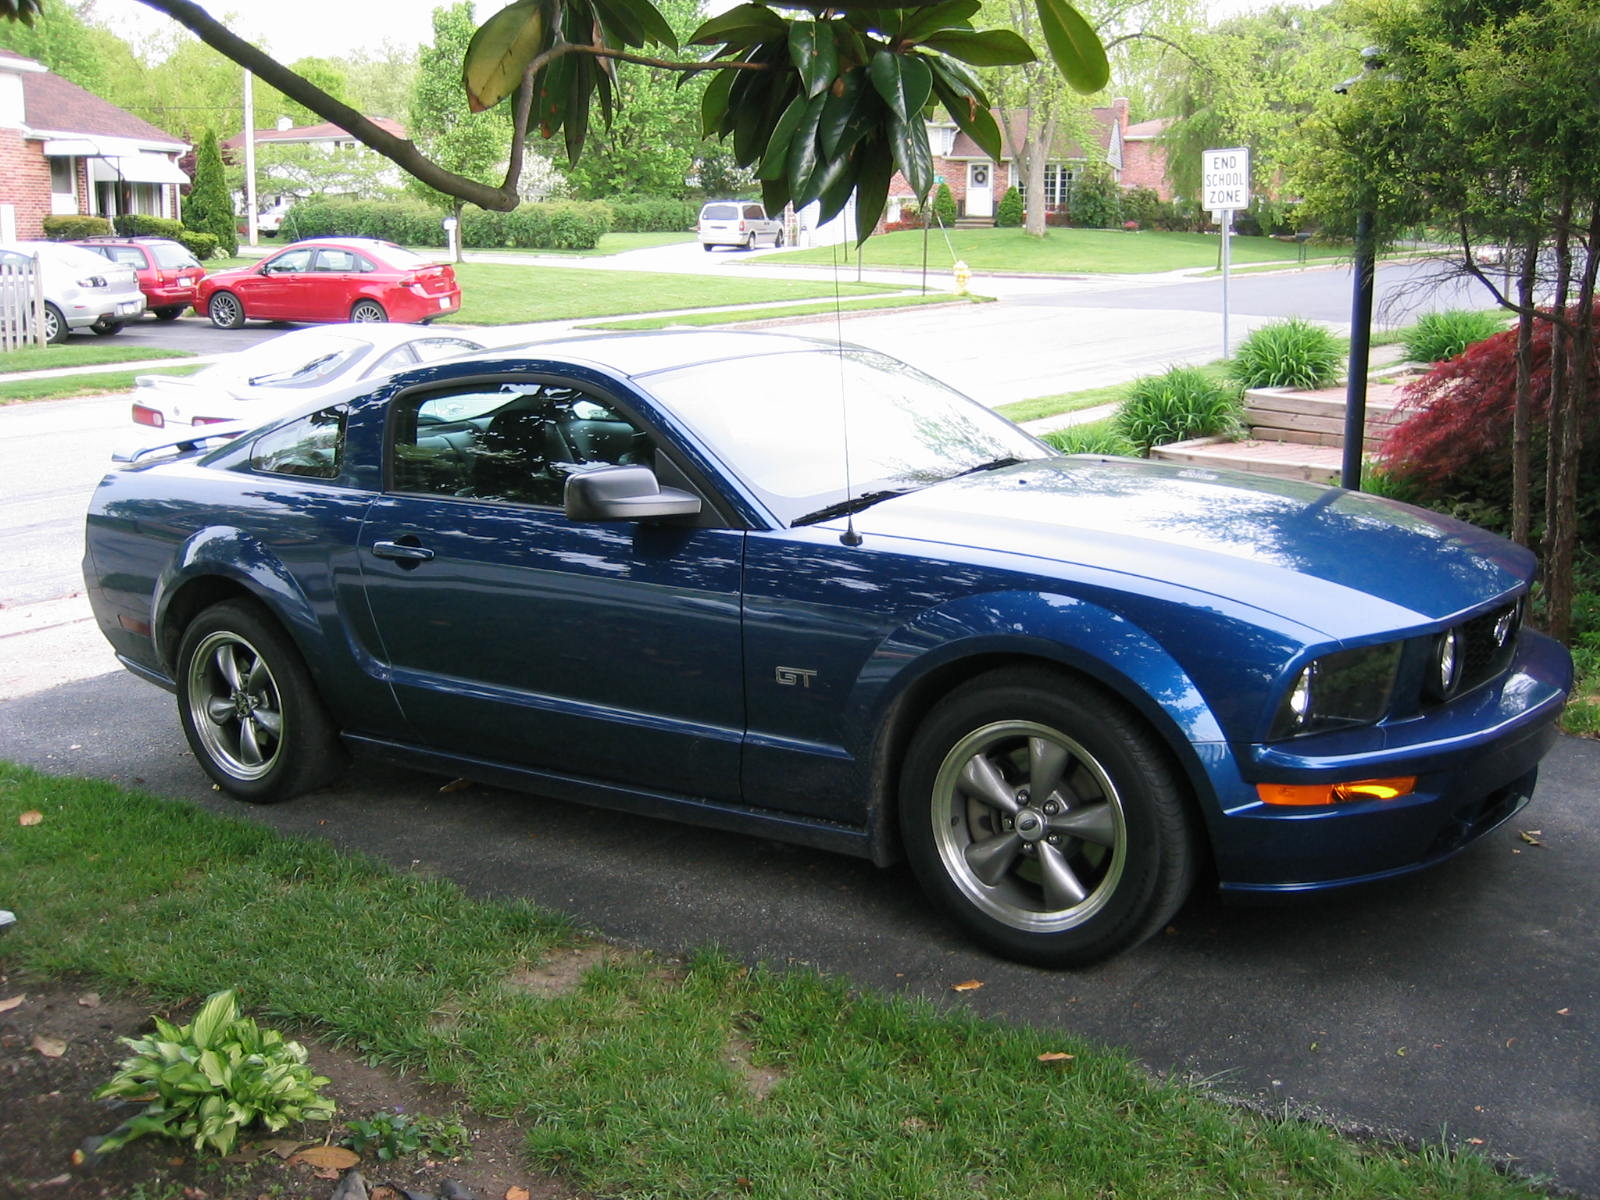 2006 Ford mustang 0-60 times #10